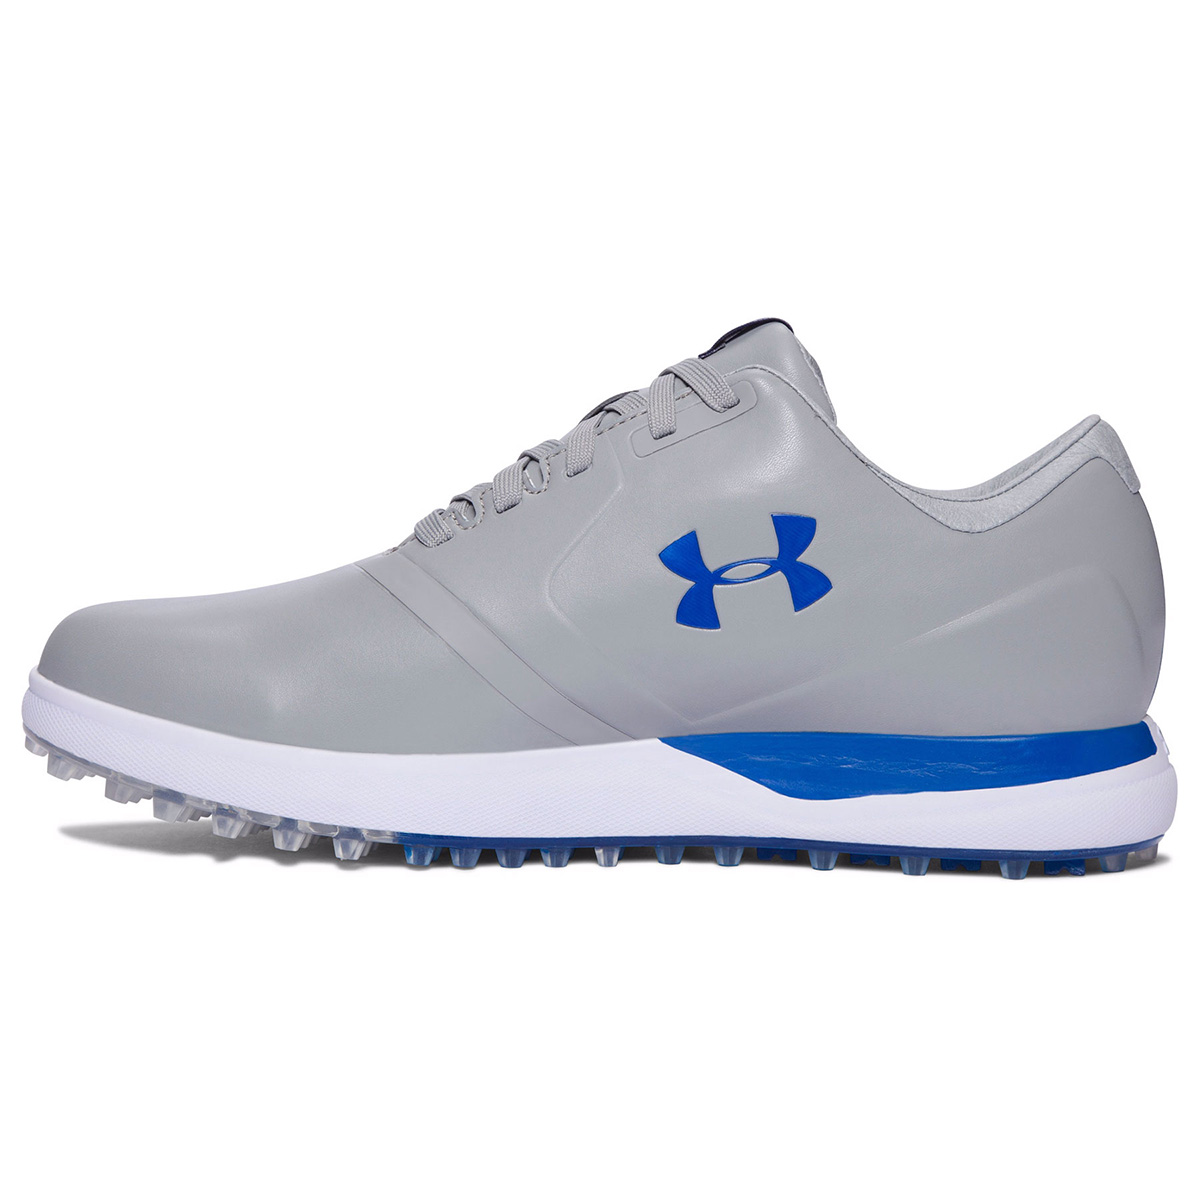 under armour mens performance leather spikeless golf shoes